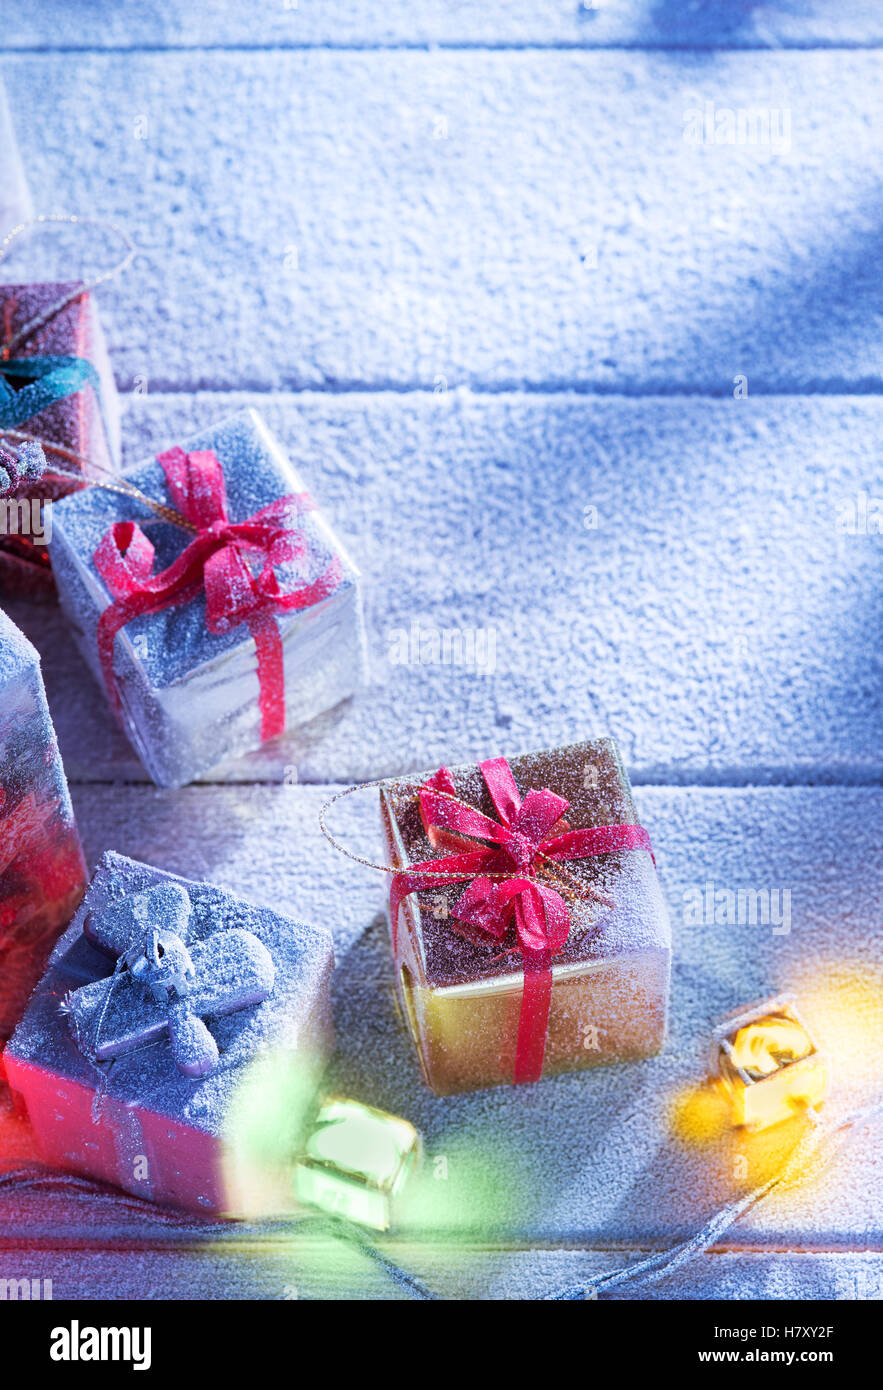 close up view  of gifts boxes  on snowbound  wooden back Stock Photo